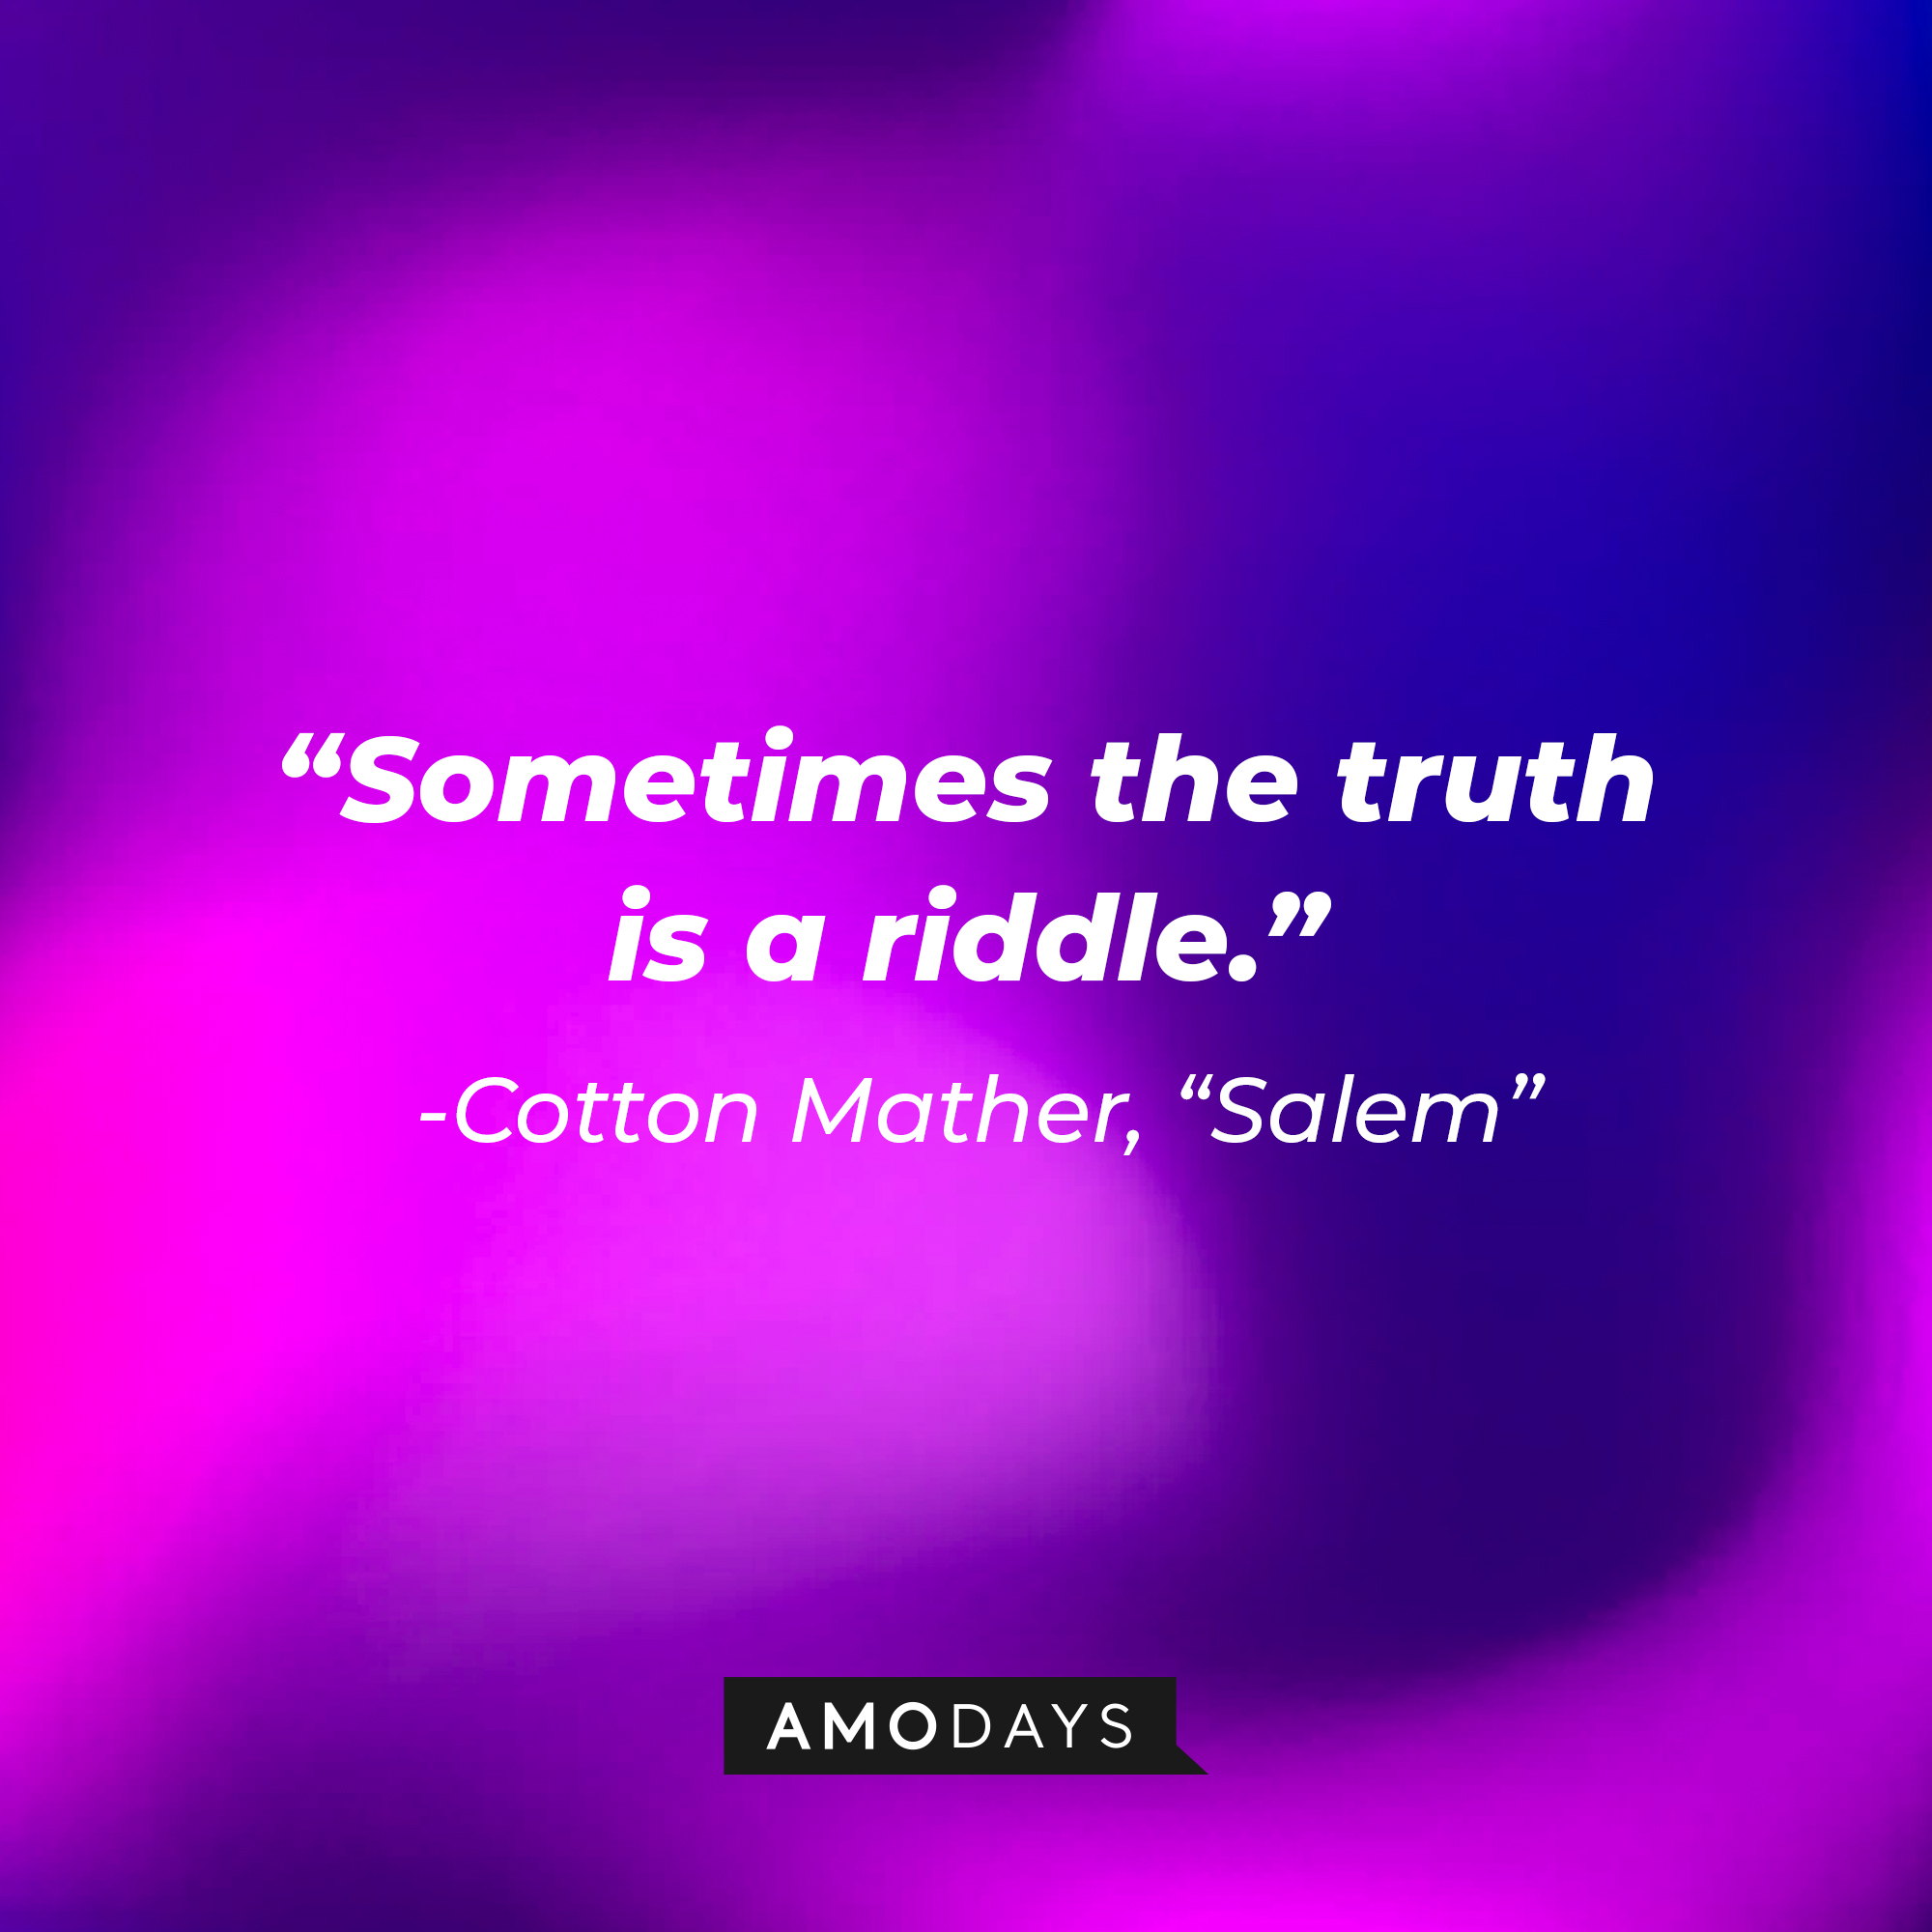 Cotton Mather's quote: "Sometimes the truth is a riddle." | Source: Amodays